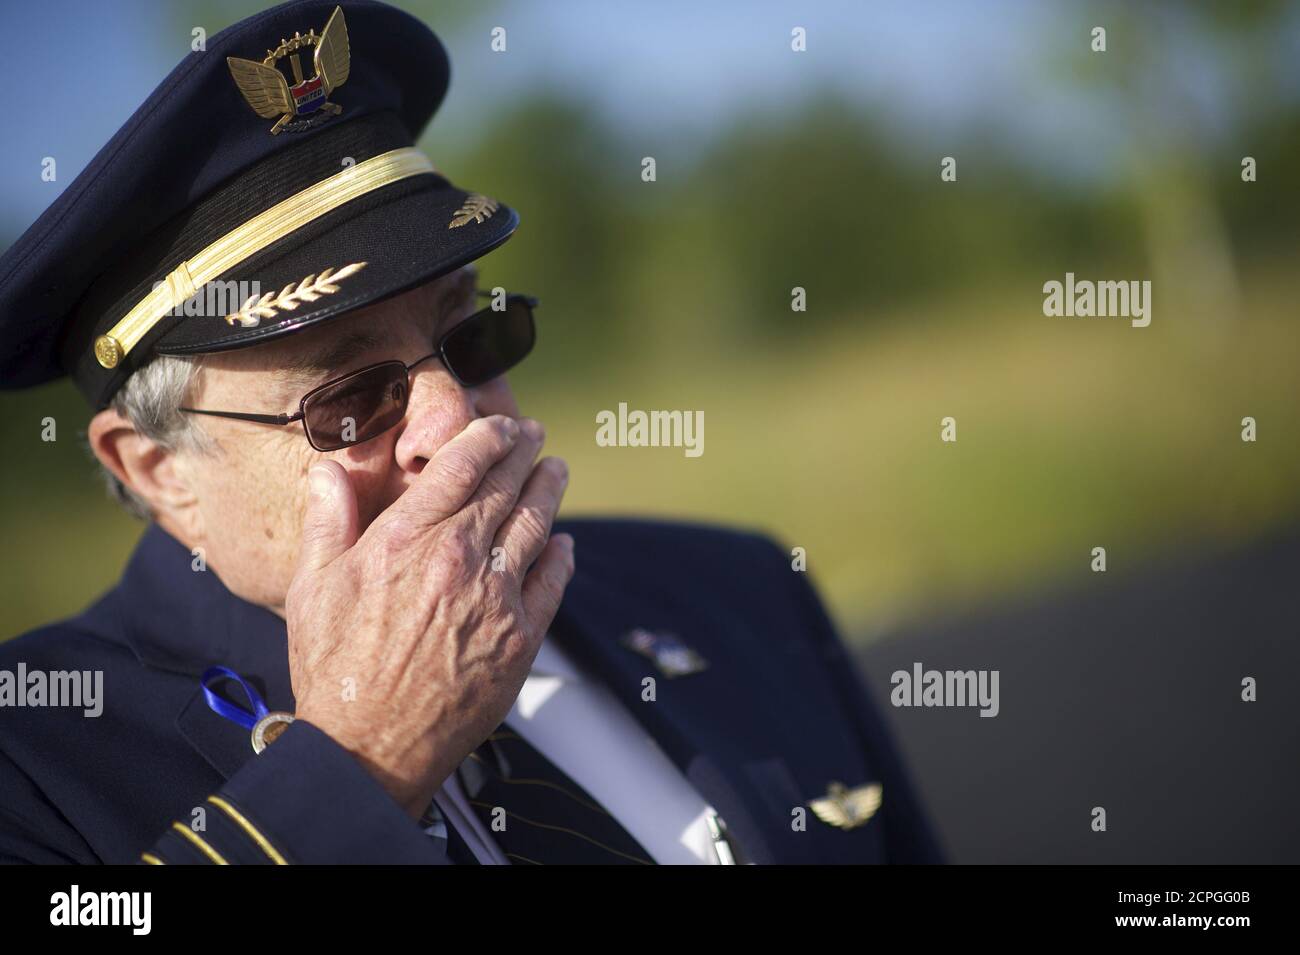 REFILE - CORRECTING NAME OF SUBJECTRetired United Airlines Captain Morrie Wiener, who retired on September 1, 2011 and had been scheduled to pilot Flight 93, and worked with many of the airline staff that died, visits the Flight 93 National Memorial, which officially opened yesterday in Shanksville, Pennsylvania September 11, 2015. Relatives gathered to commemorate nearly 3,000 people killed in the Sept. 11 attacks in New York, Pennsylvania and outside Washington 14 years ago, when airliners hijacked by al Qaeda militants brought death, mayhem and destruction. REUTERS/Mark Makela Stock Photo